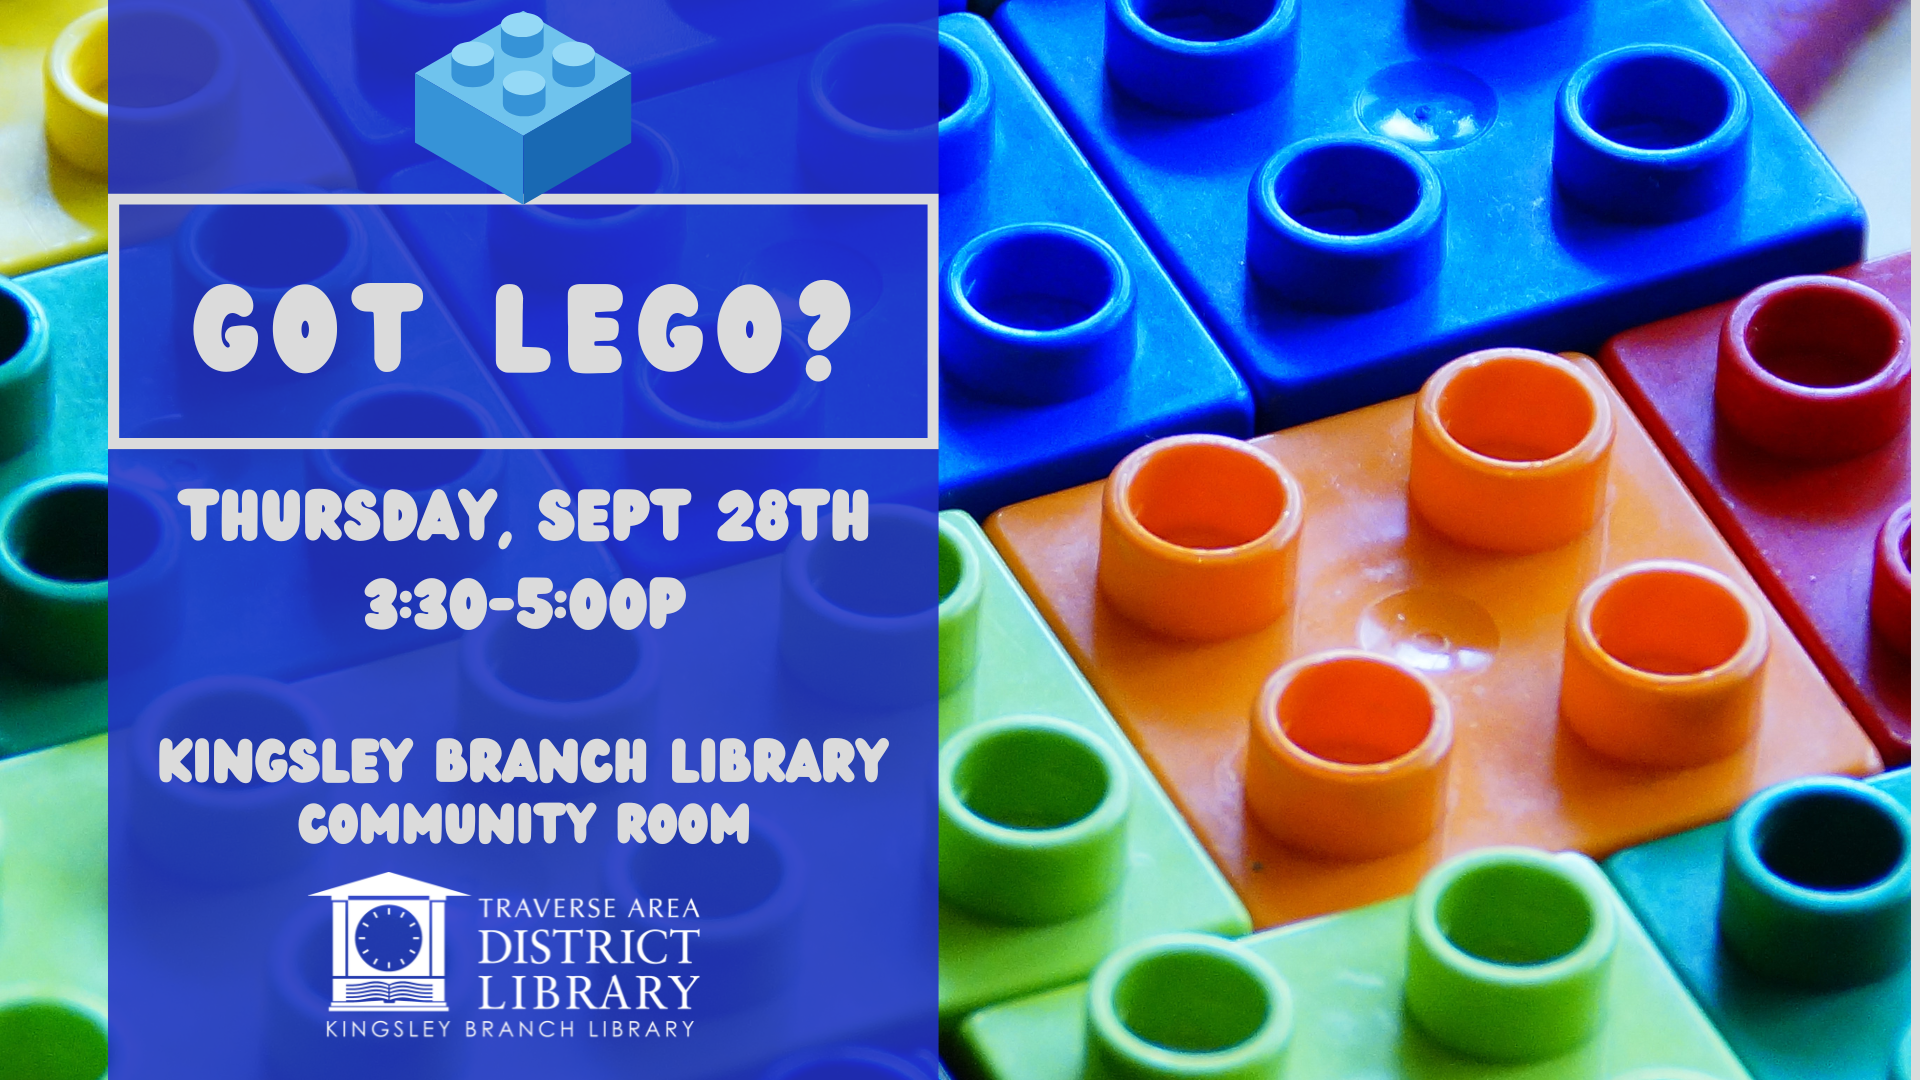 Image of Lego bricks stacked next to each other. Overlay text reads "Got Lego?" with the Kingsley Branch Library logo.